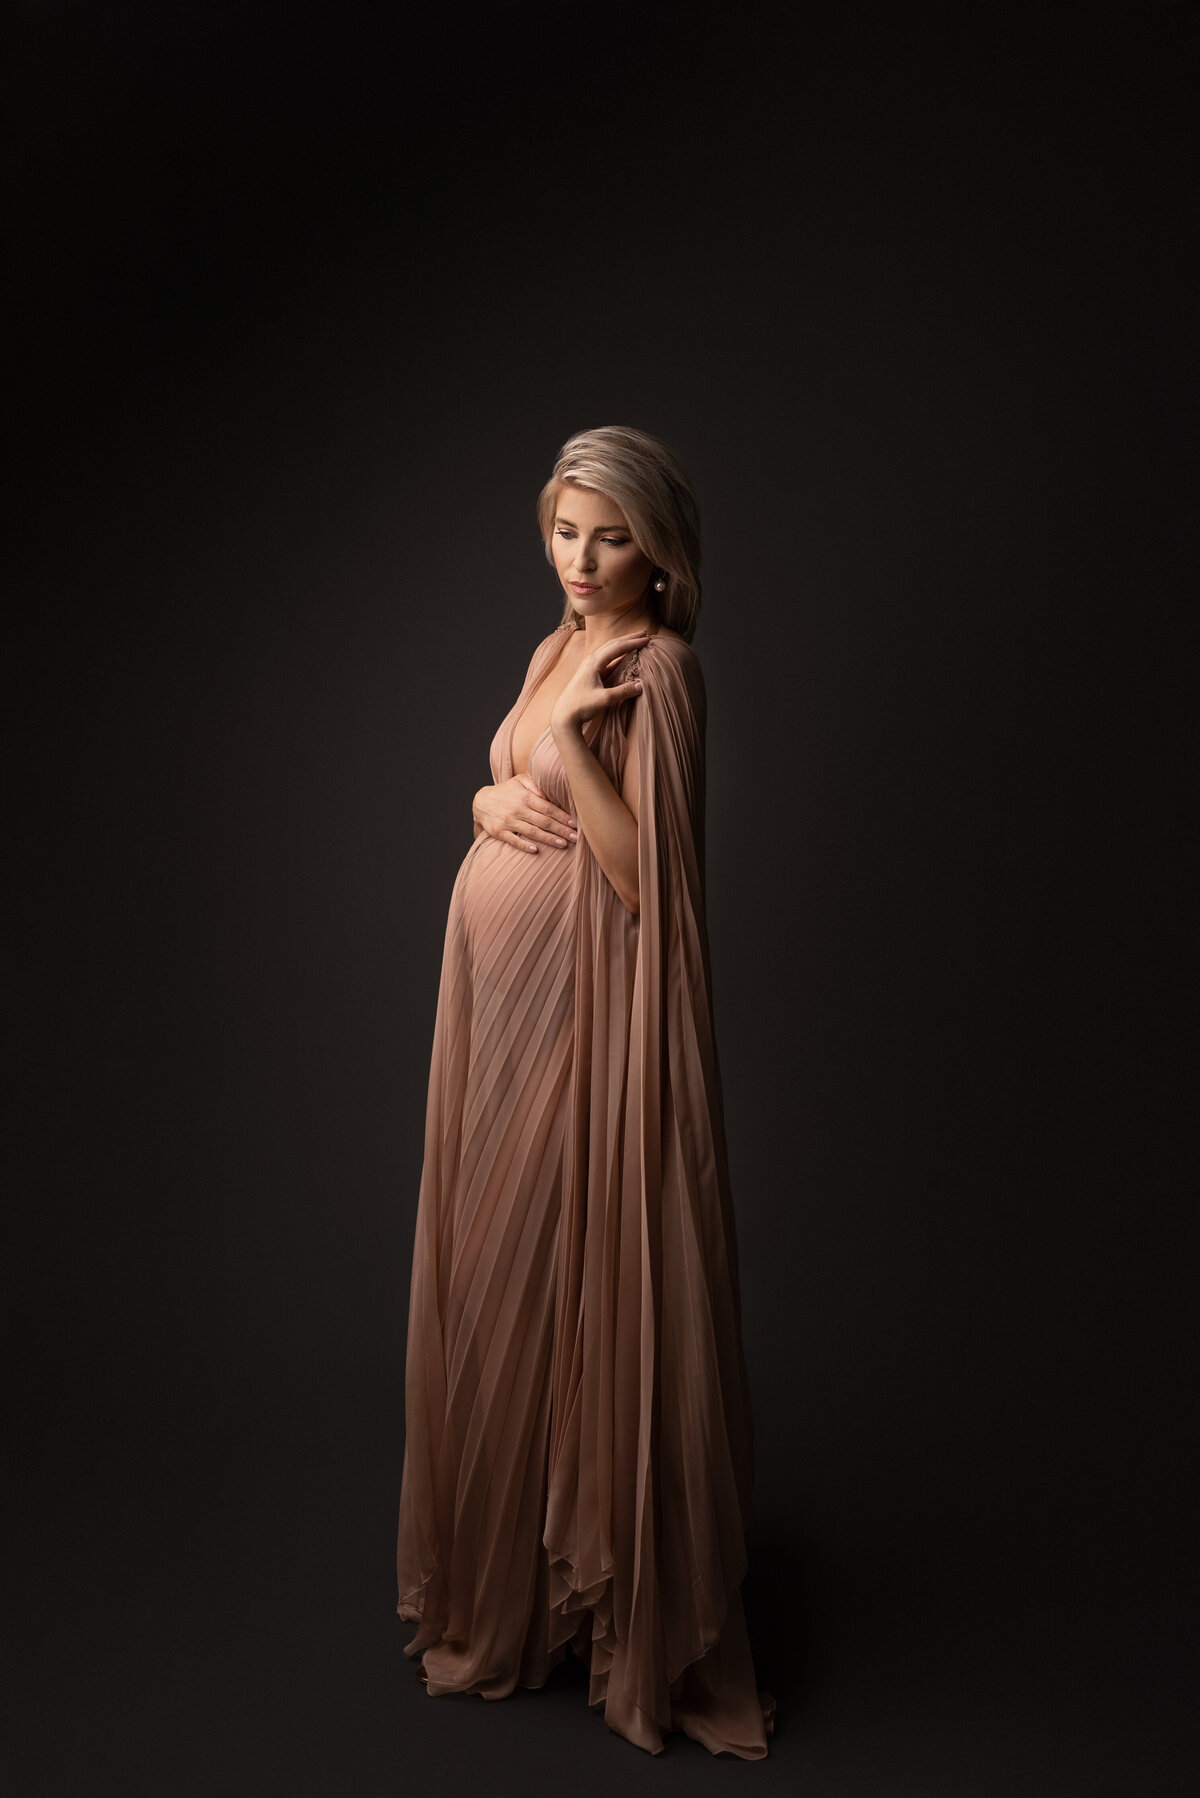 Woman in long dusty rose organza maternity sheath with cape poses for New Jersey maternity photoshoot. She is angled away from the camera with her back arm resting atop of her baby bump and  her forearm is touching her shoulder. She is looking down gently toward her baby bump. Captured by best NJ maternity photographer Katie Marshall.